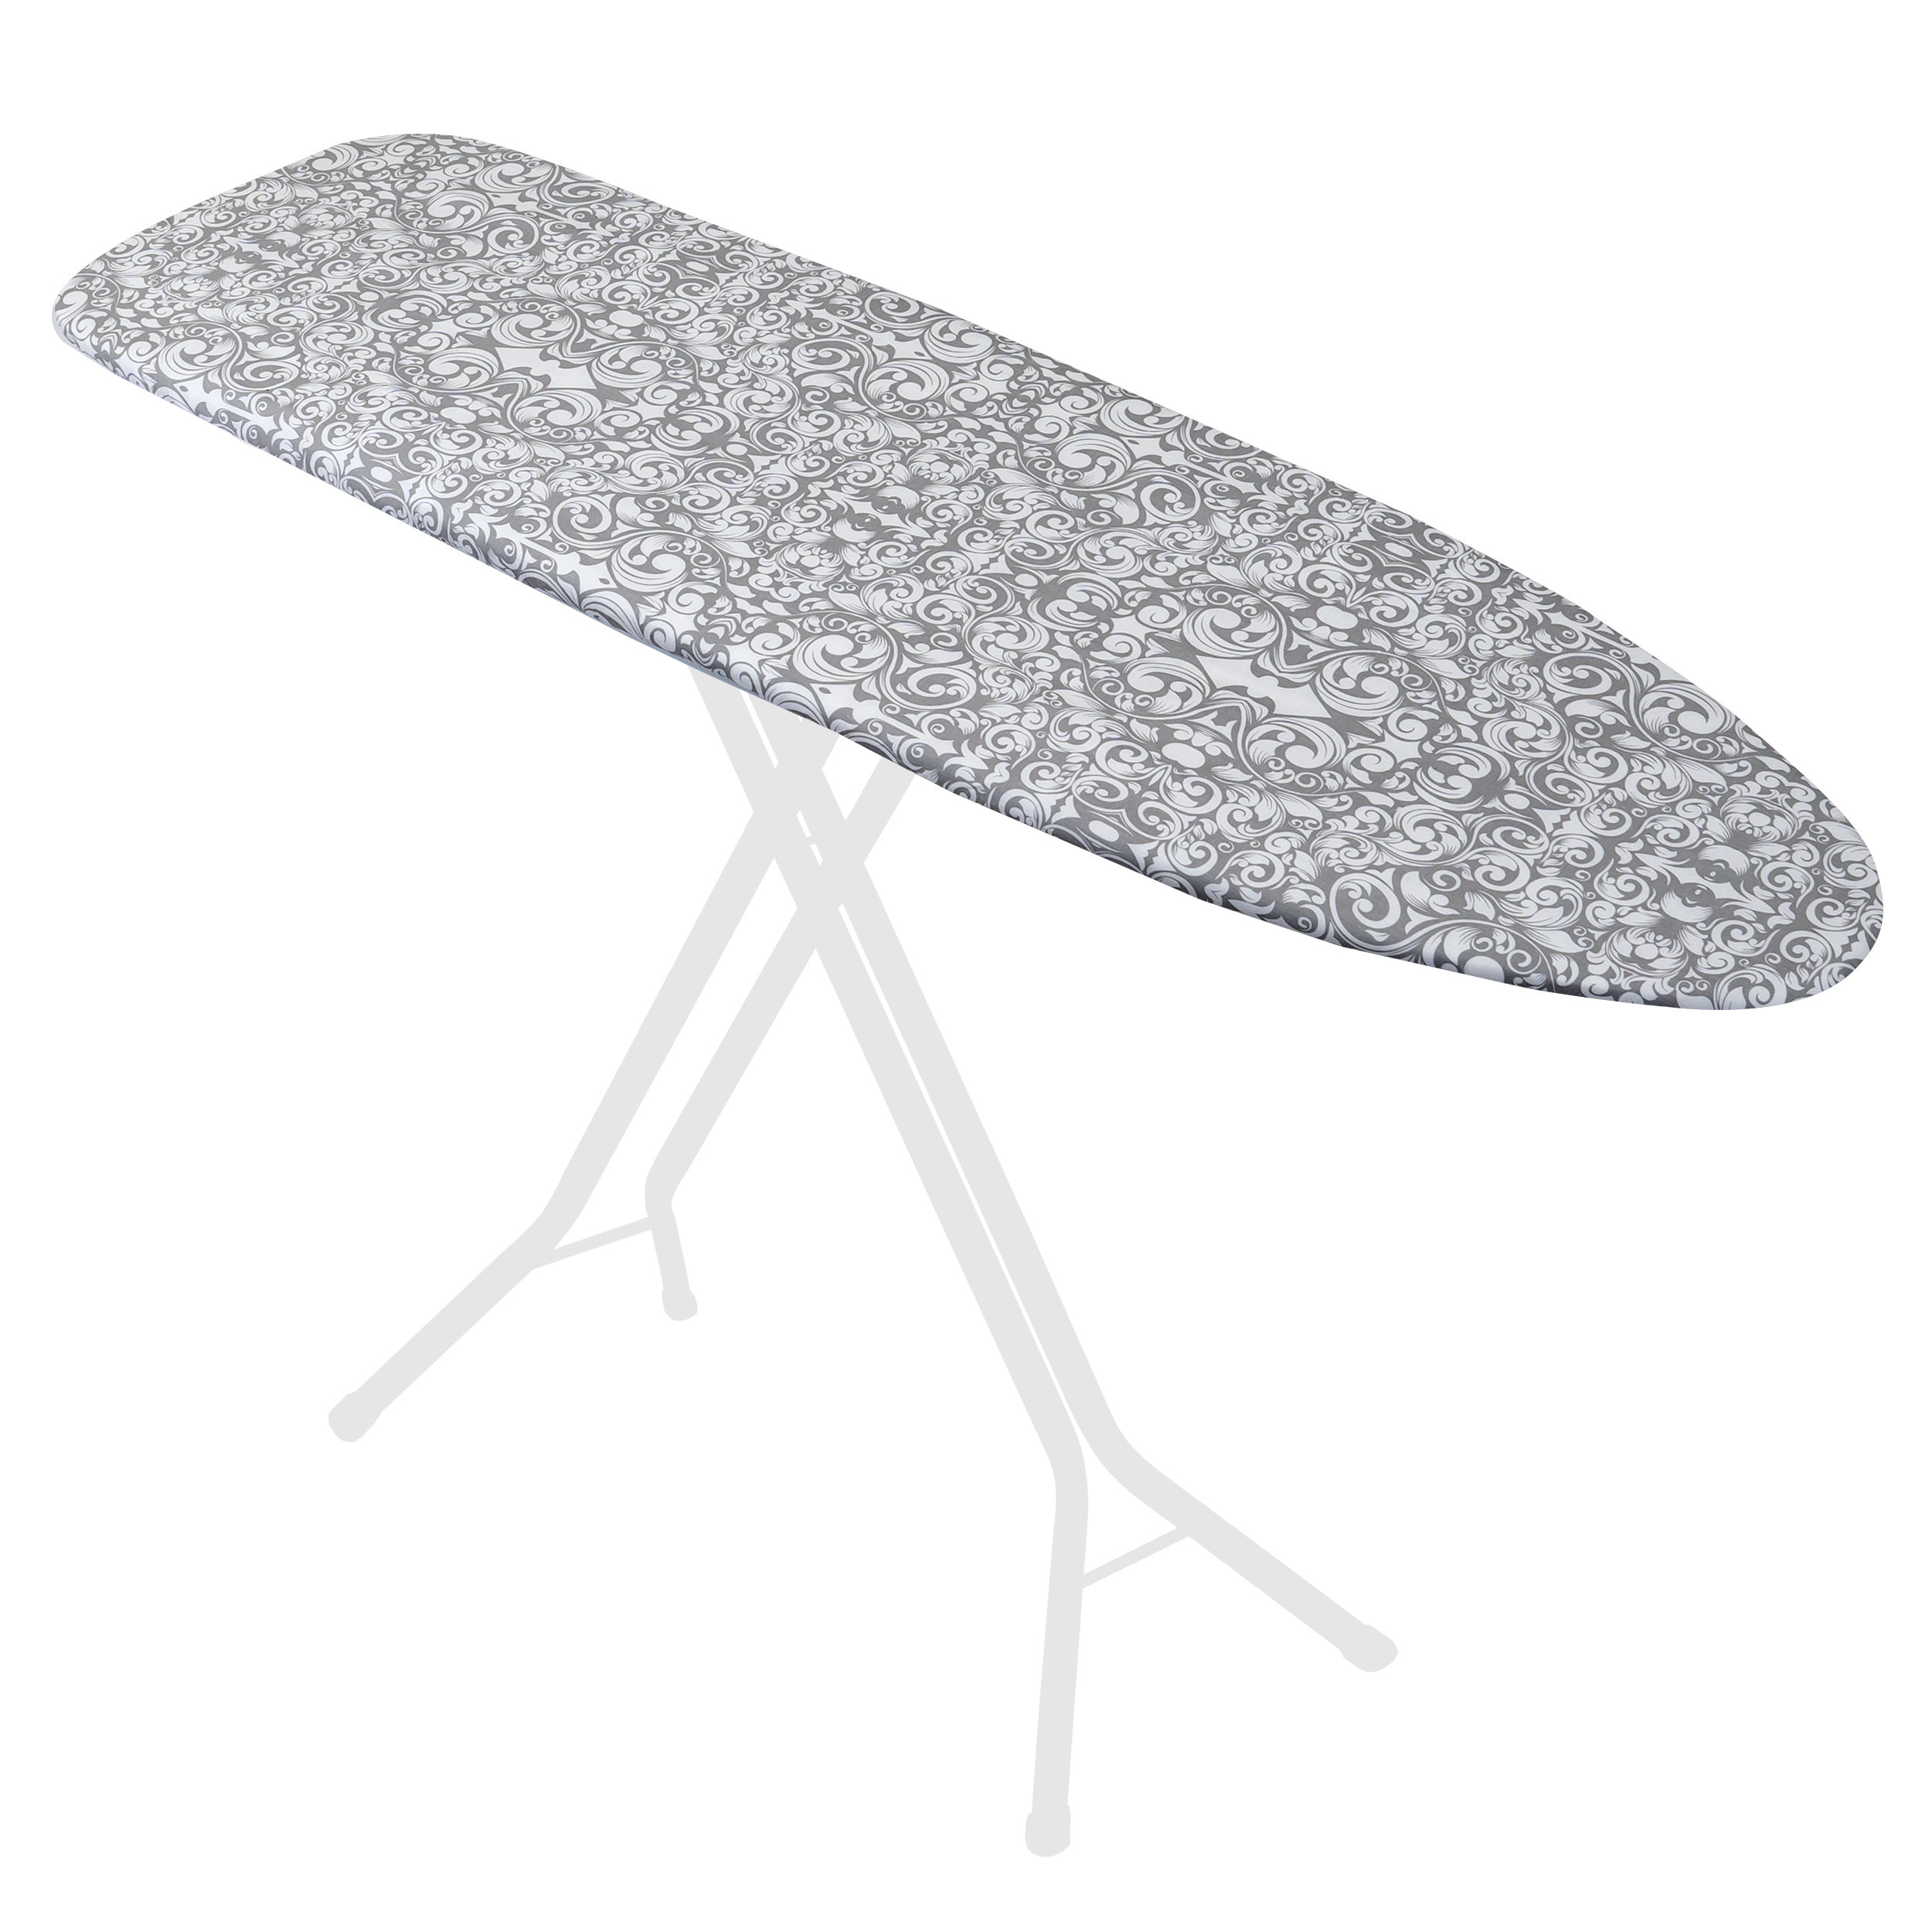 Universal silver coated ironing board cover & 4mm pad thick reflect heat 2sizeBH